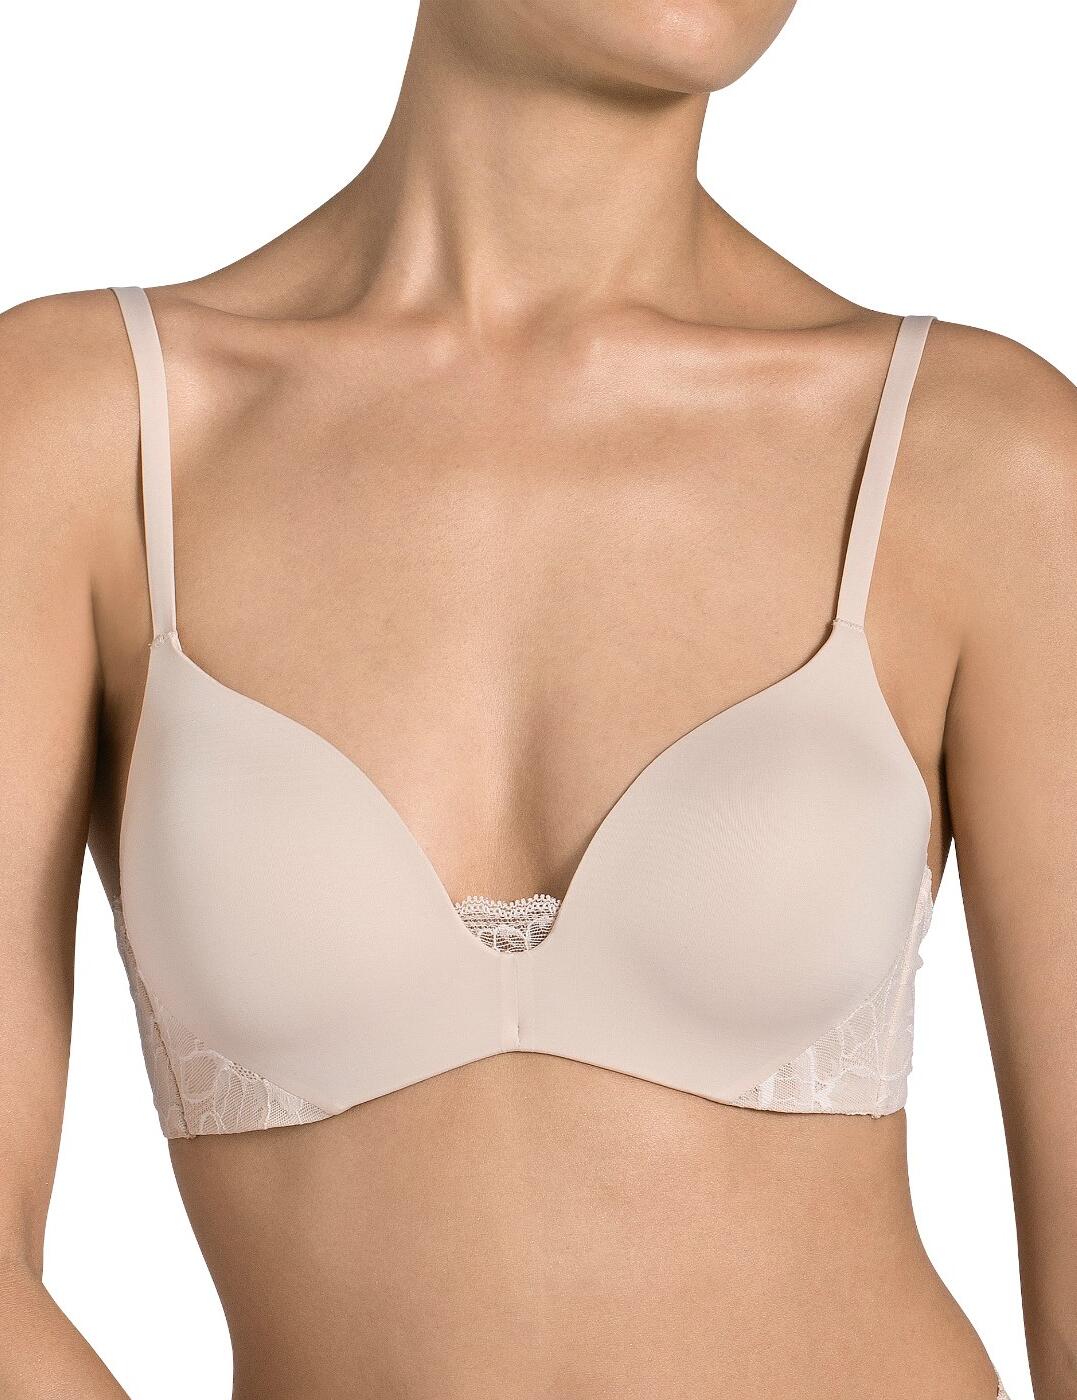 Triumph Magic Wire 10159262 Underwired Boost Padded Low Cut Shape Up Bra